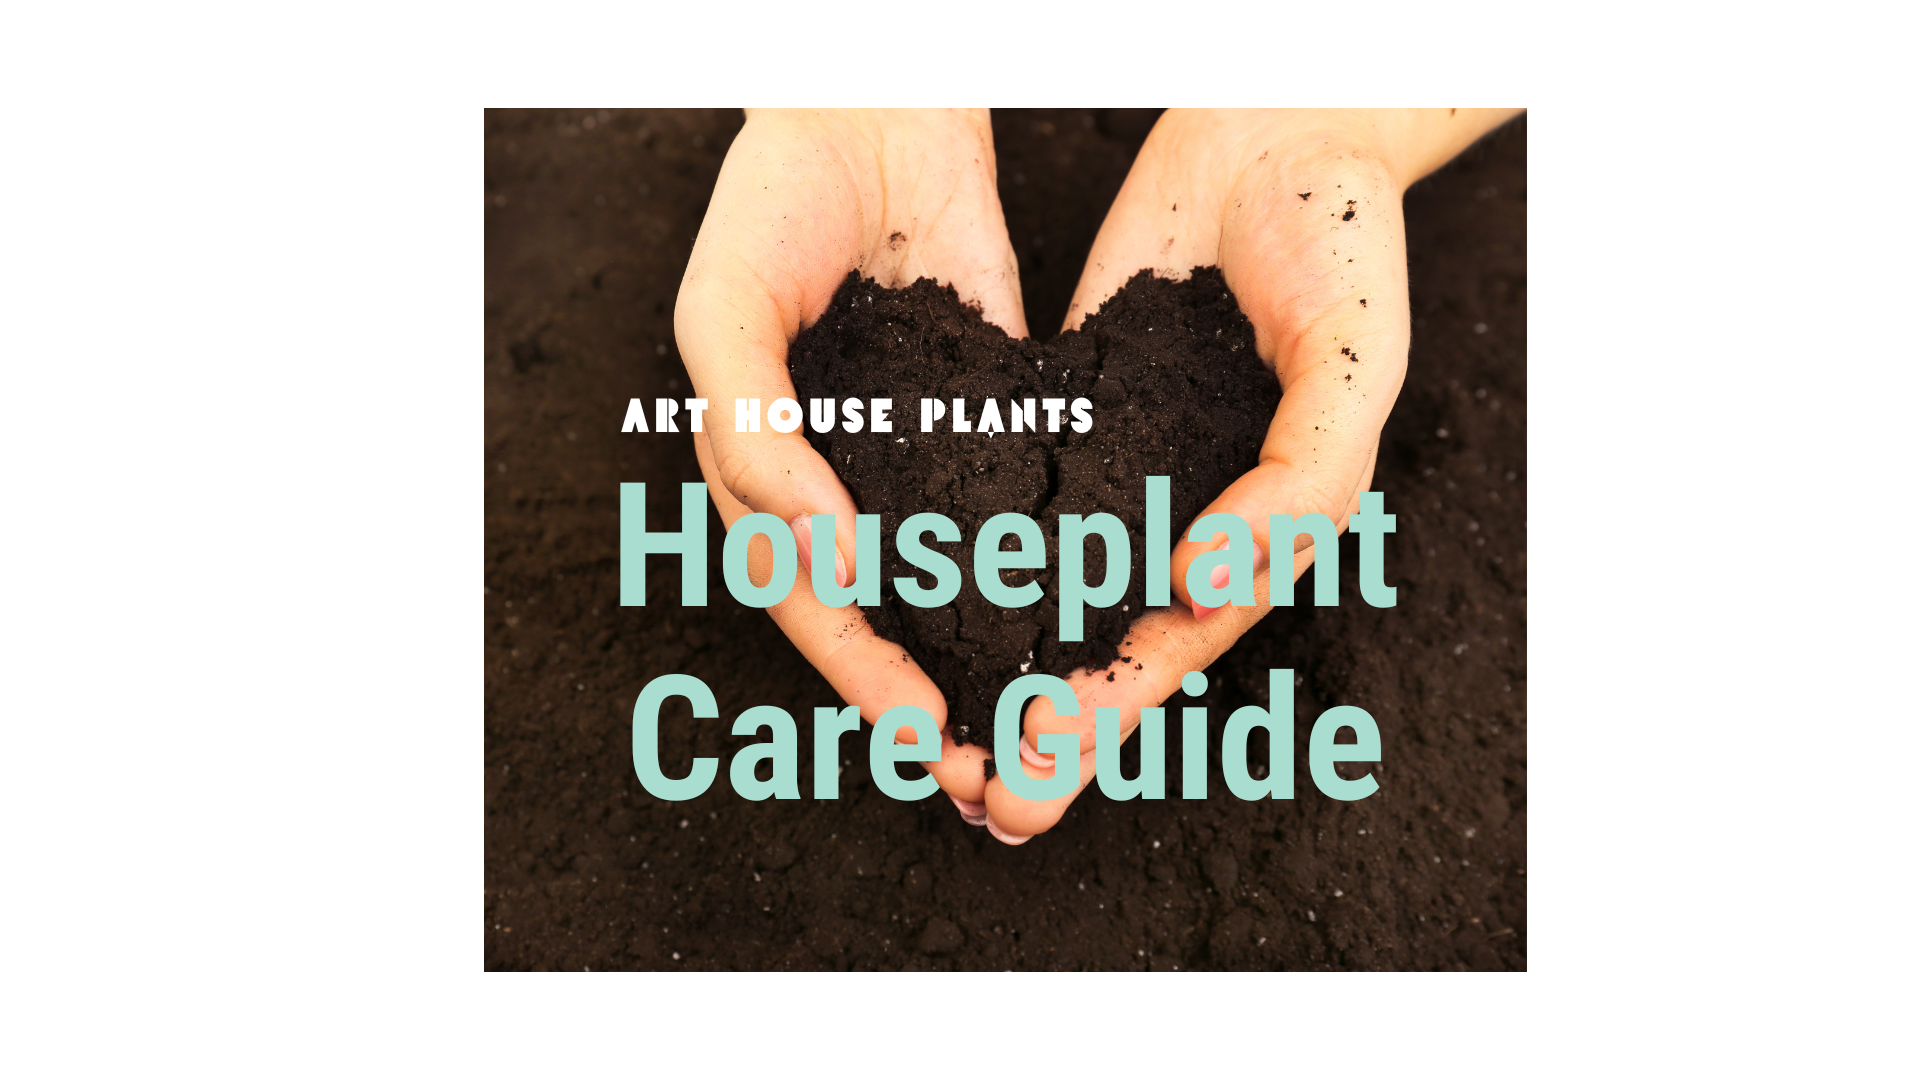 hand holding dirt in shape of heart, title "Houseplant Care Guide" by Art House Plants